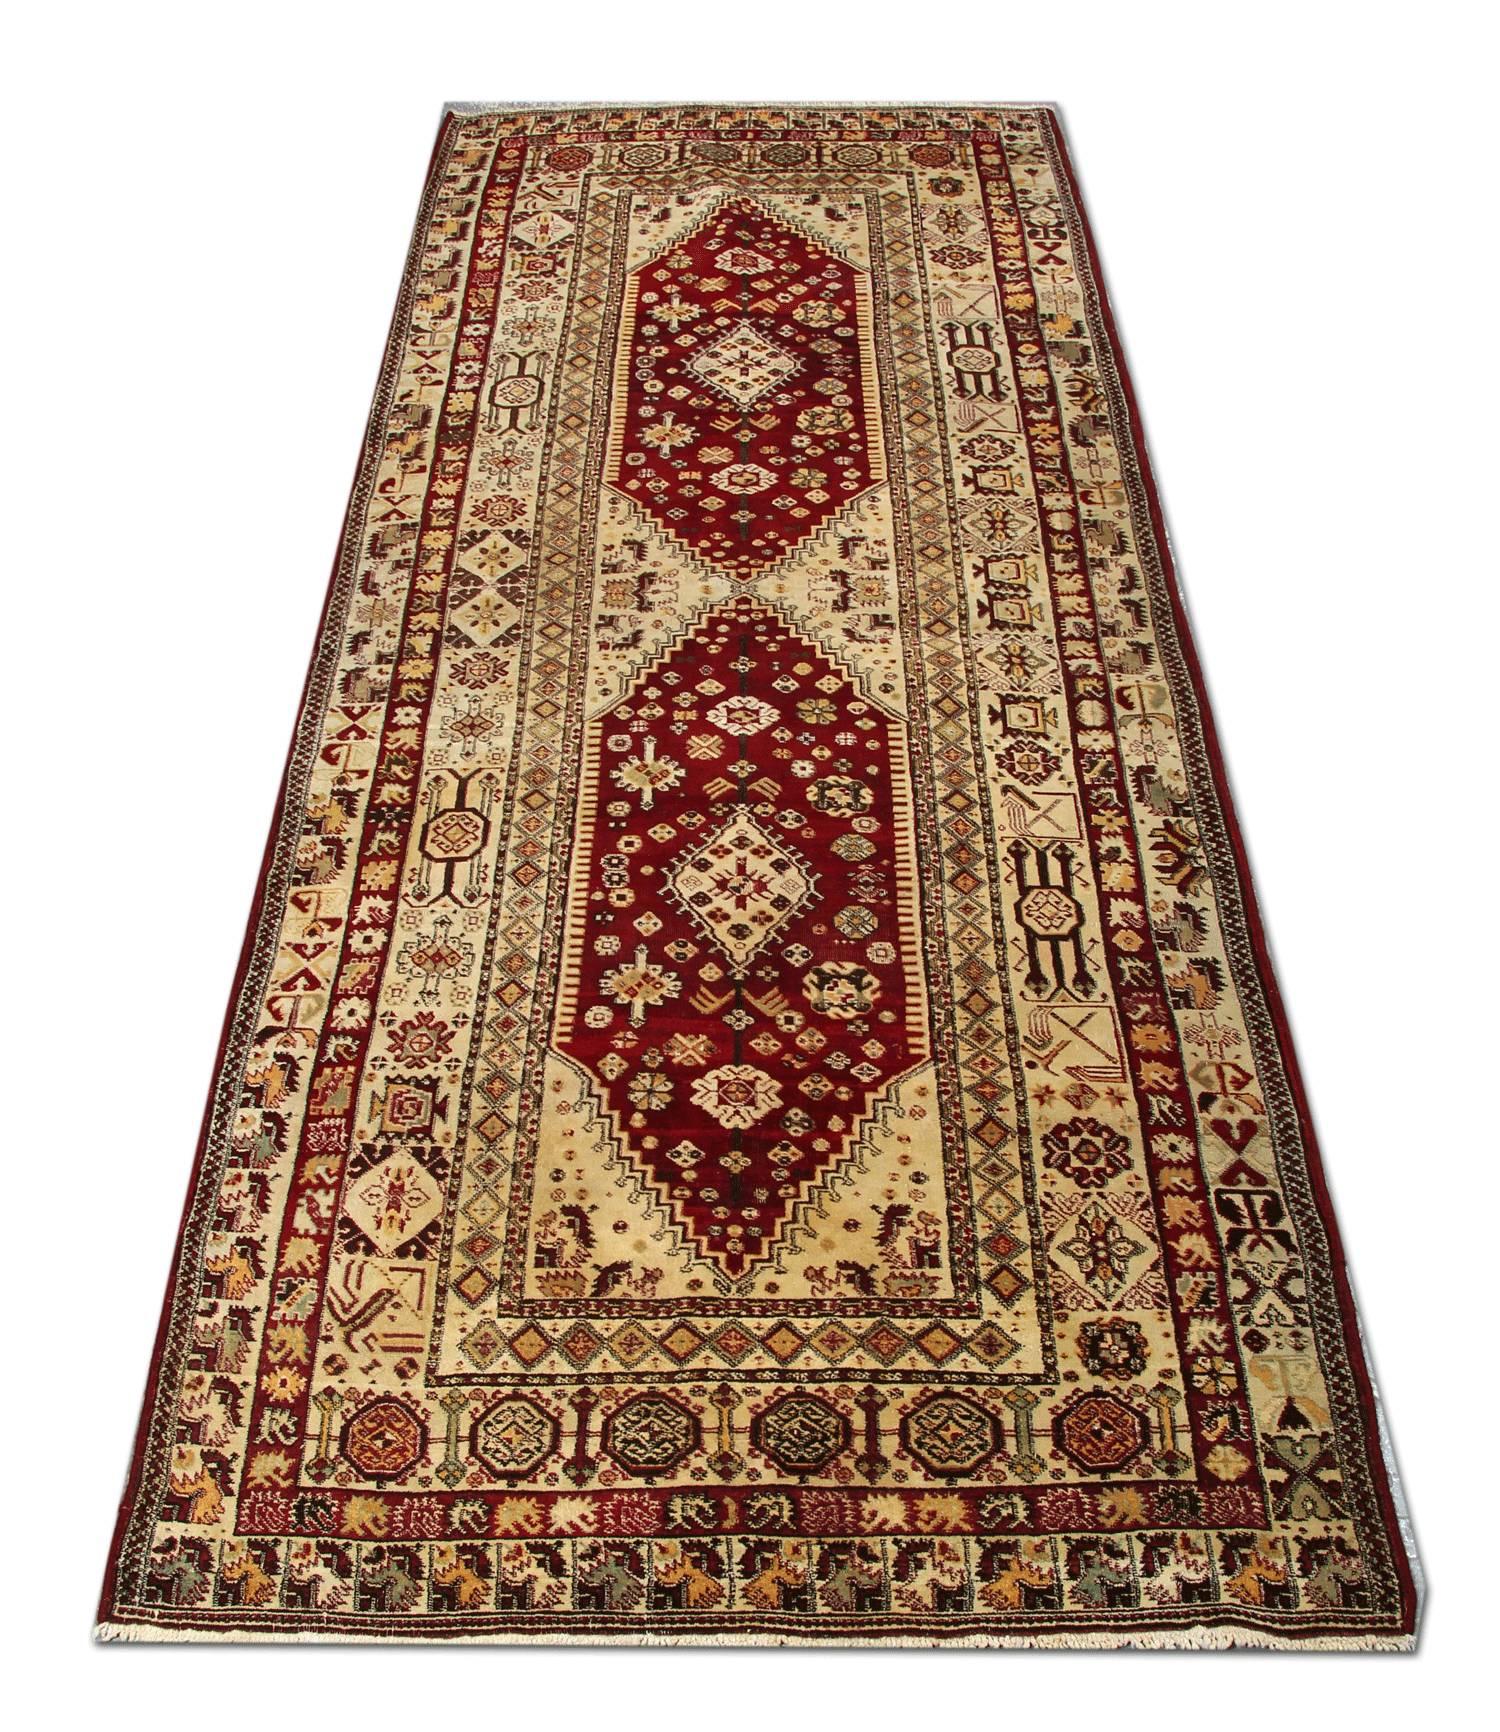 This handmade carpet oriental rug is an Indian Agra floral rug in a very good condition. The rust color on this woven rug has sat in harmony with the lime green and the gold color of the carpet. The segmented border of this carpet rug gives it the